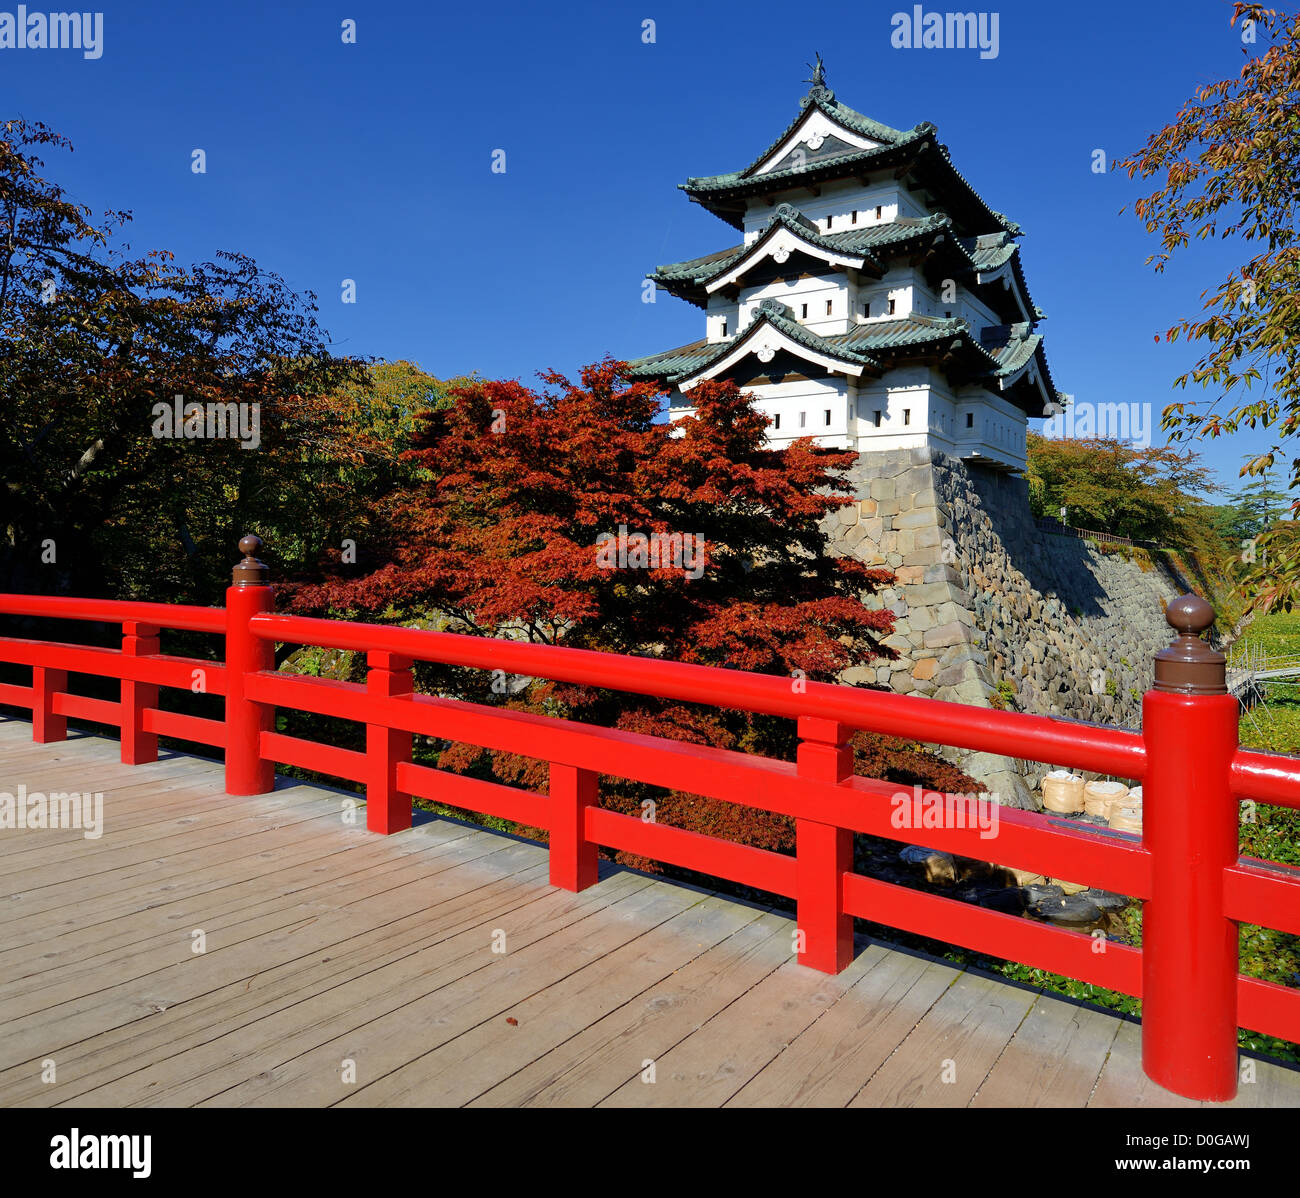 Hirosaki Castle in Hirosaki, Japan. The castle dates from 1611 and was the seat of the Tsugaru Clan. Stock Photo